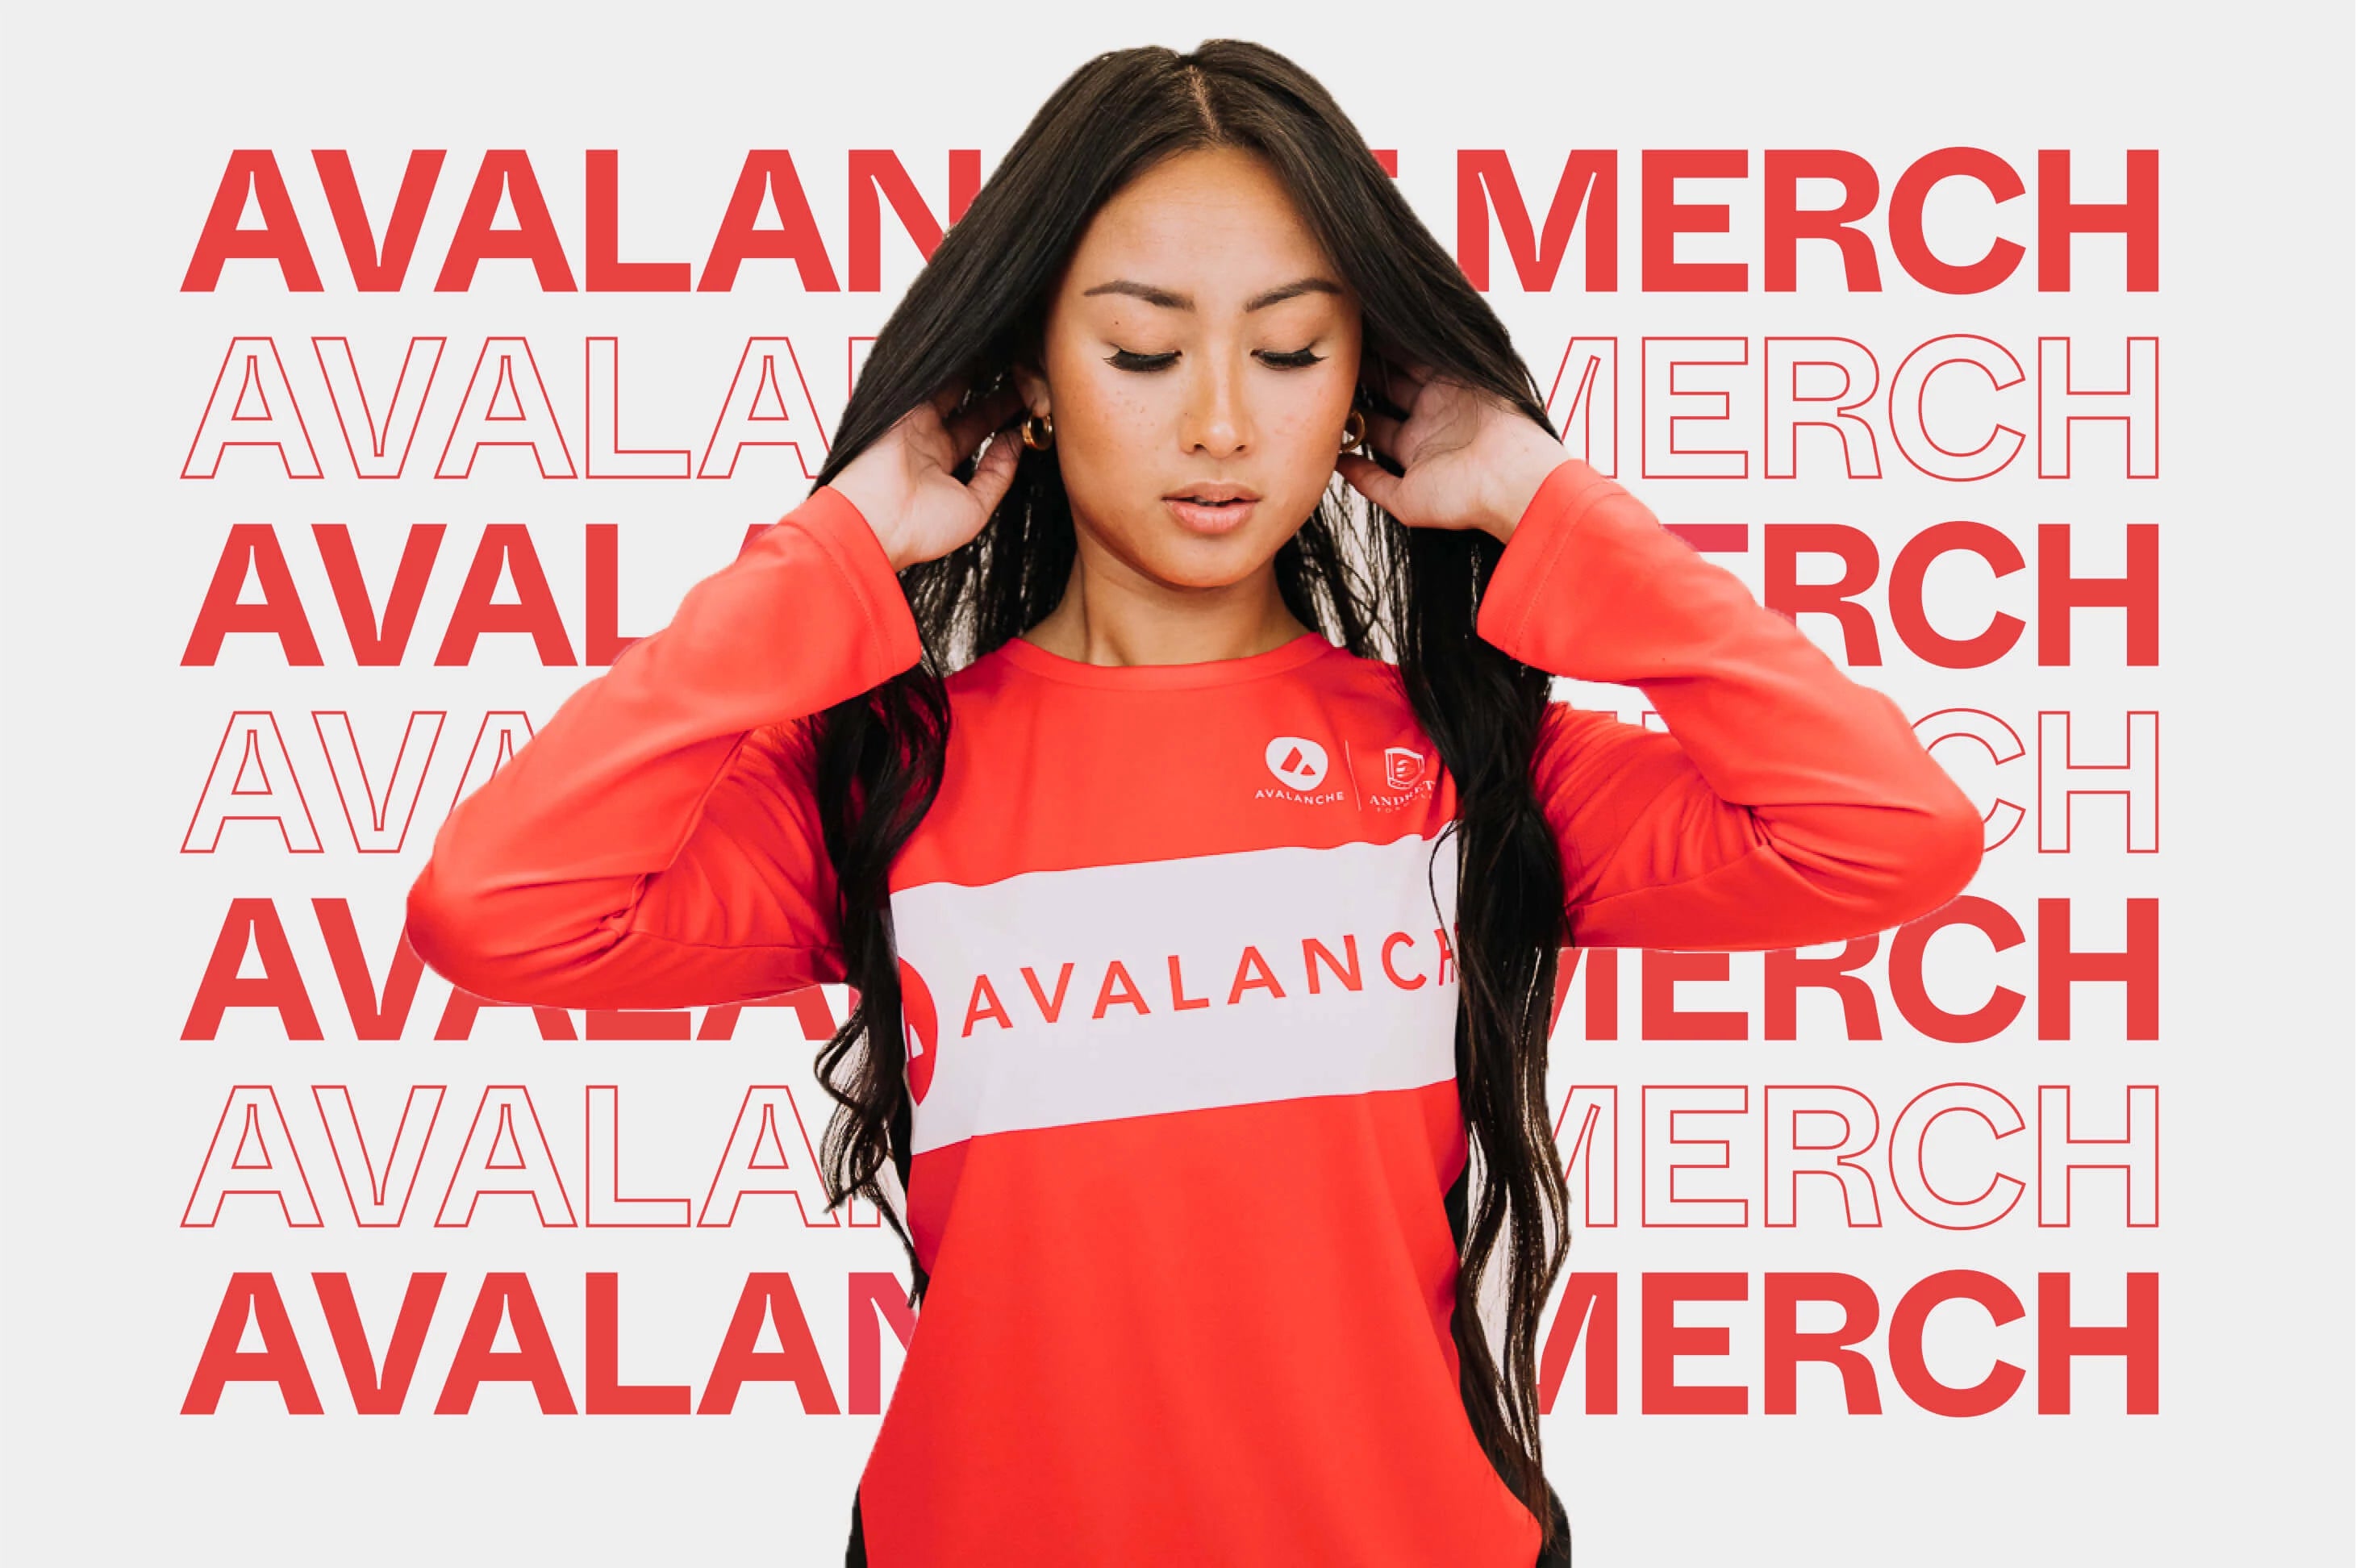 Avalanche - Andretti Collection - Tops, Hats & Sweatshirts & More – AVAX  Merchandise